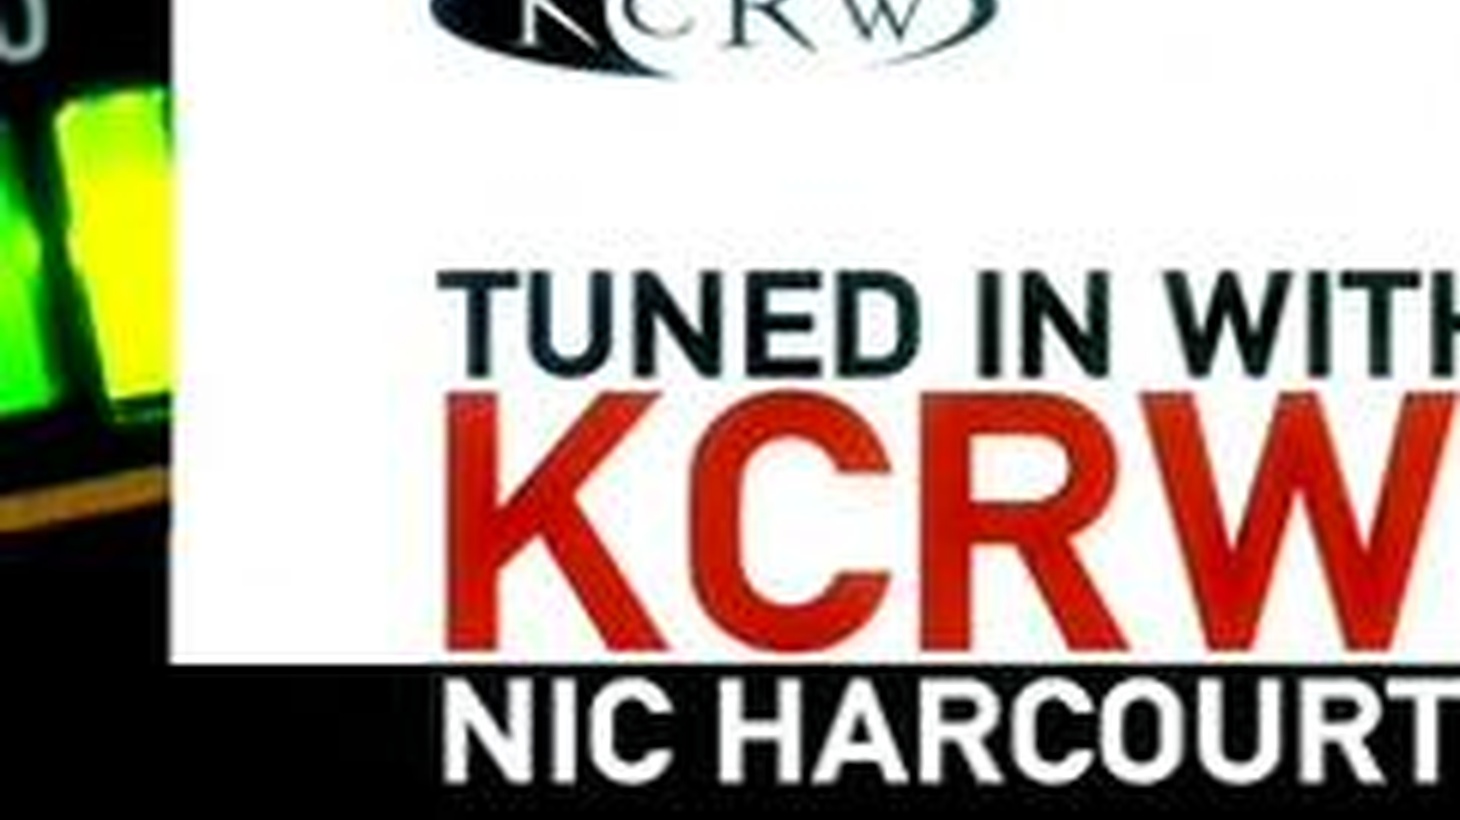 In this week’s episode Nic Harcourt shares some of the top new music featured on KCRW. Nic talks about music from new albums by Telepathique (LAST TIME ON EARTH), Marching Band (SPARK LARGE), The Swell Season (SOUNDS ECLECTIC) and...